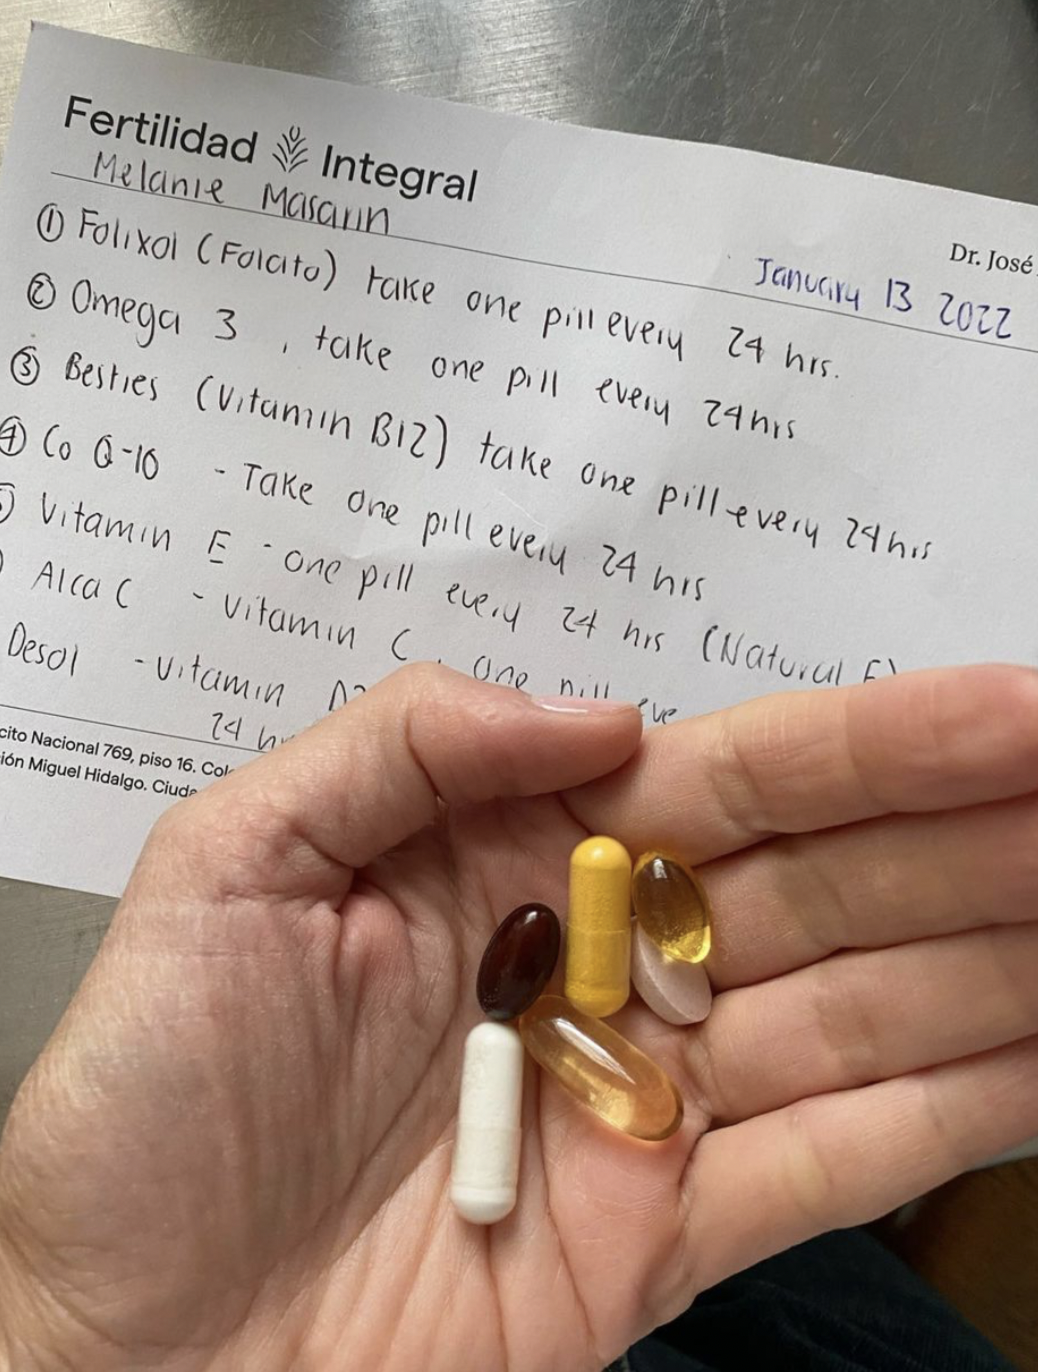 vitamins + instructions from Melanie masarin's clinic in Mexico